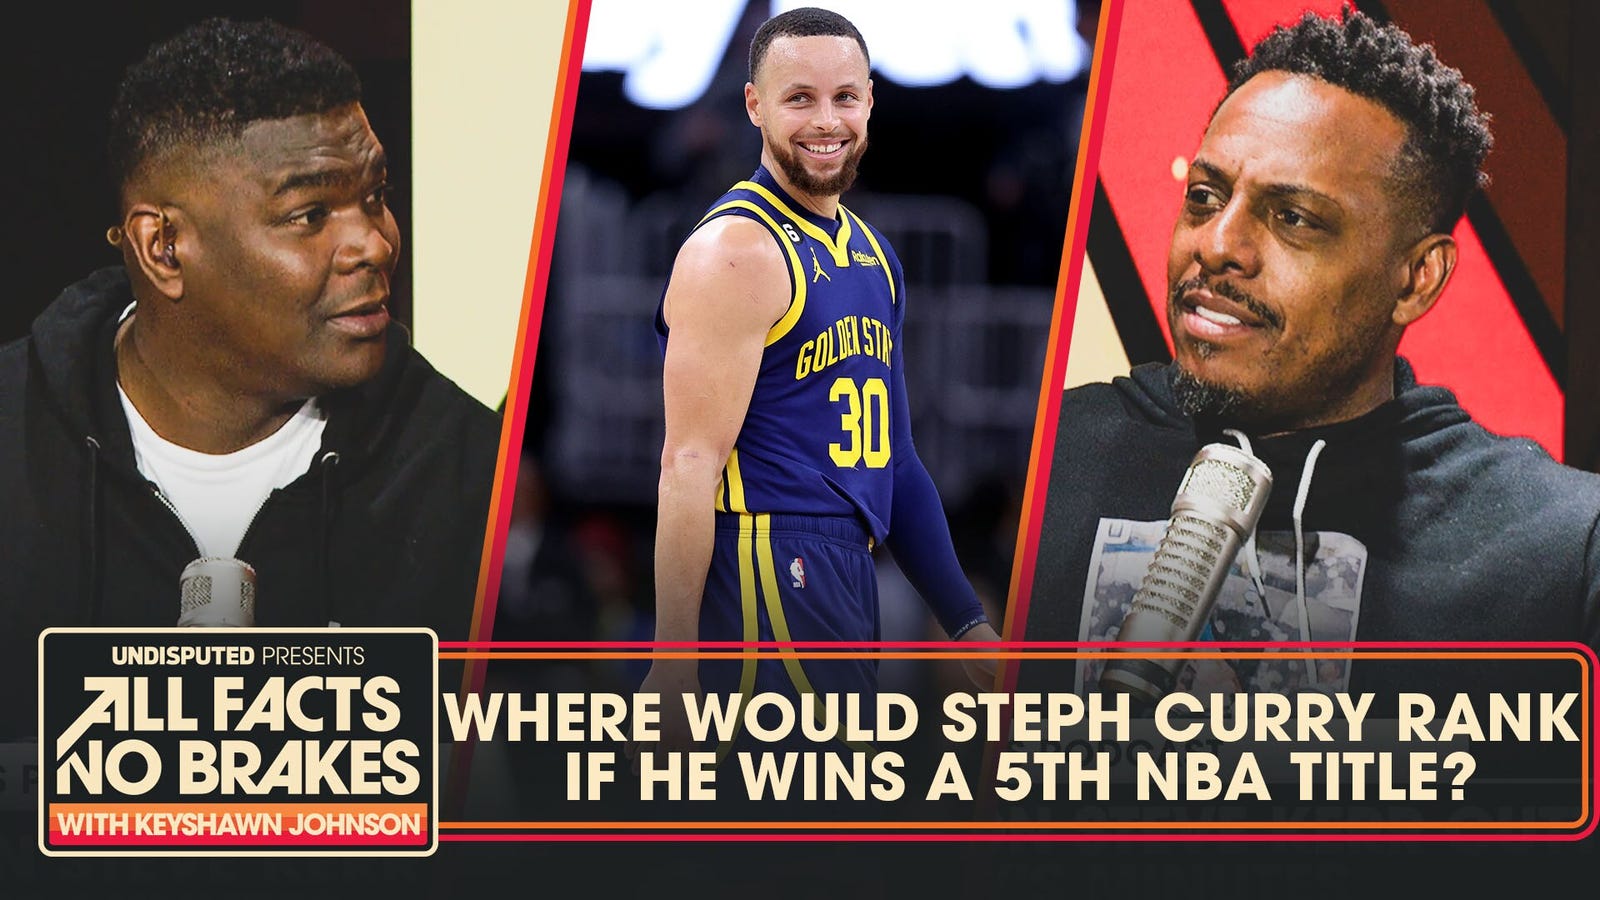 Paul Pierce: ‘If Steph Curry wins NBA title this year, he’s top 5 of all time’